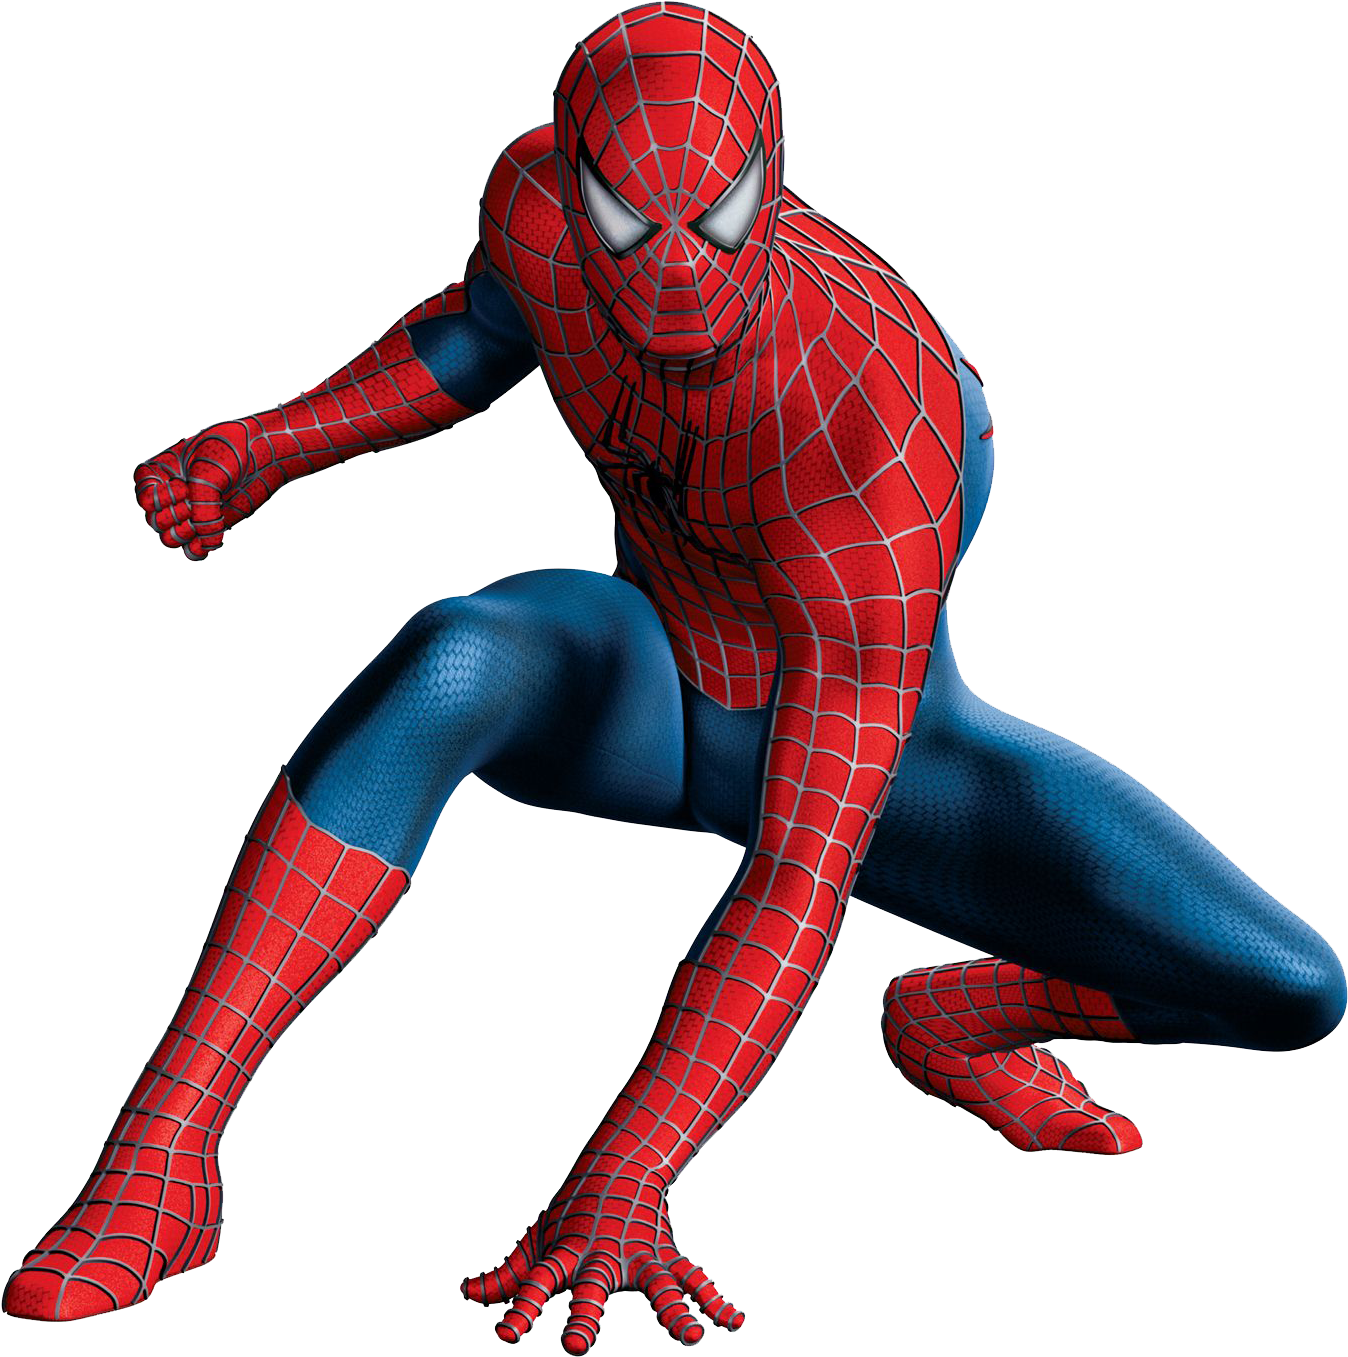 Peter Parker (The Amazing Spider-Man film series) - Wikipedia